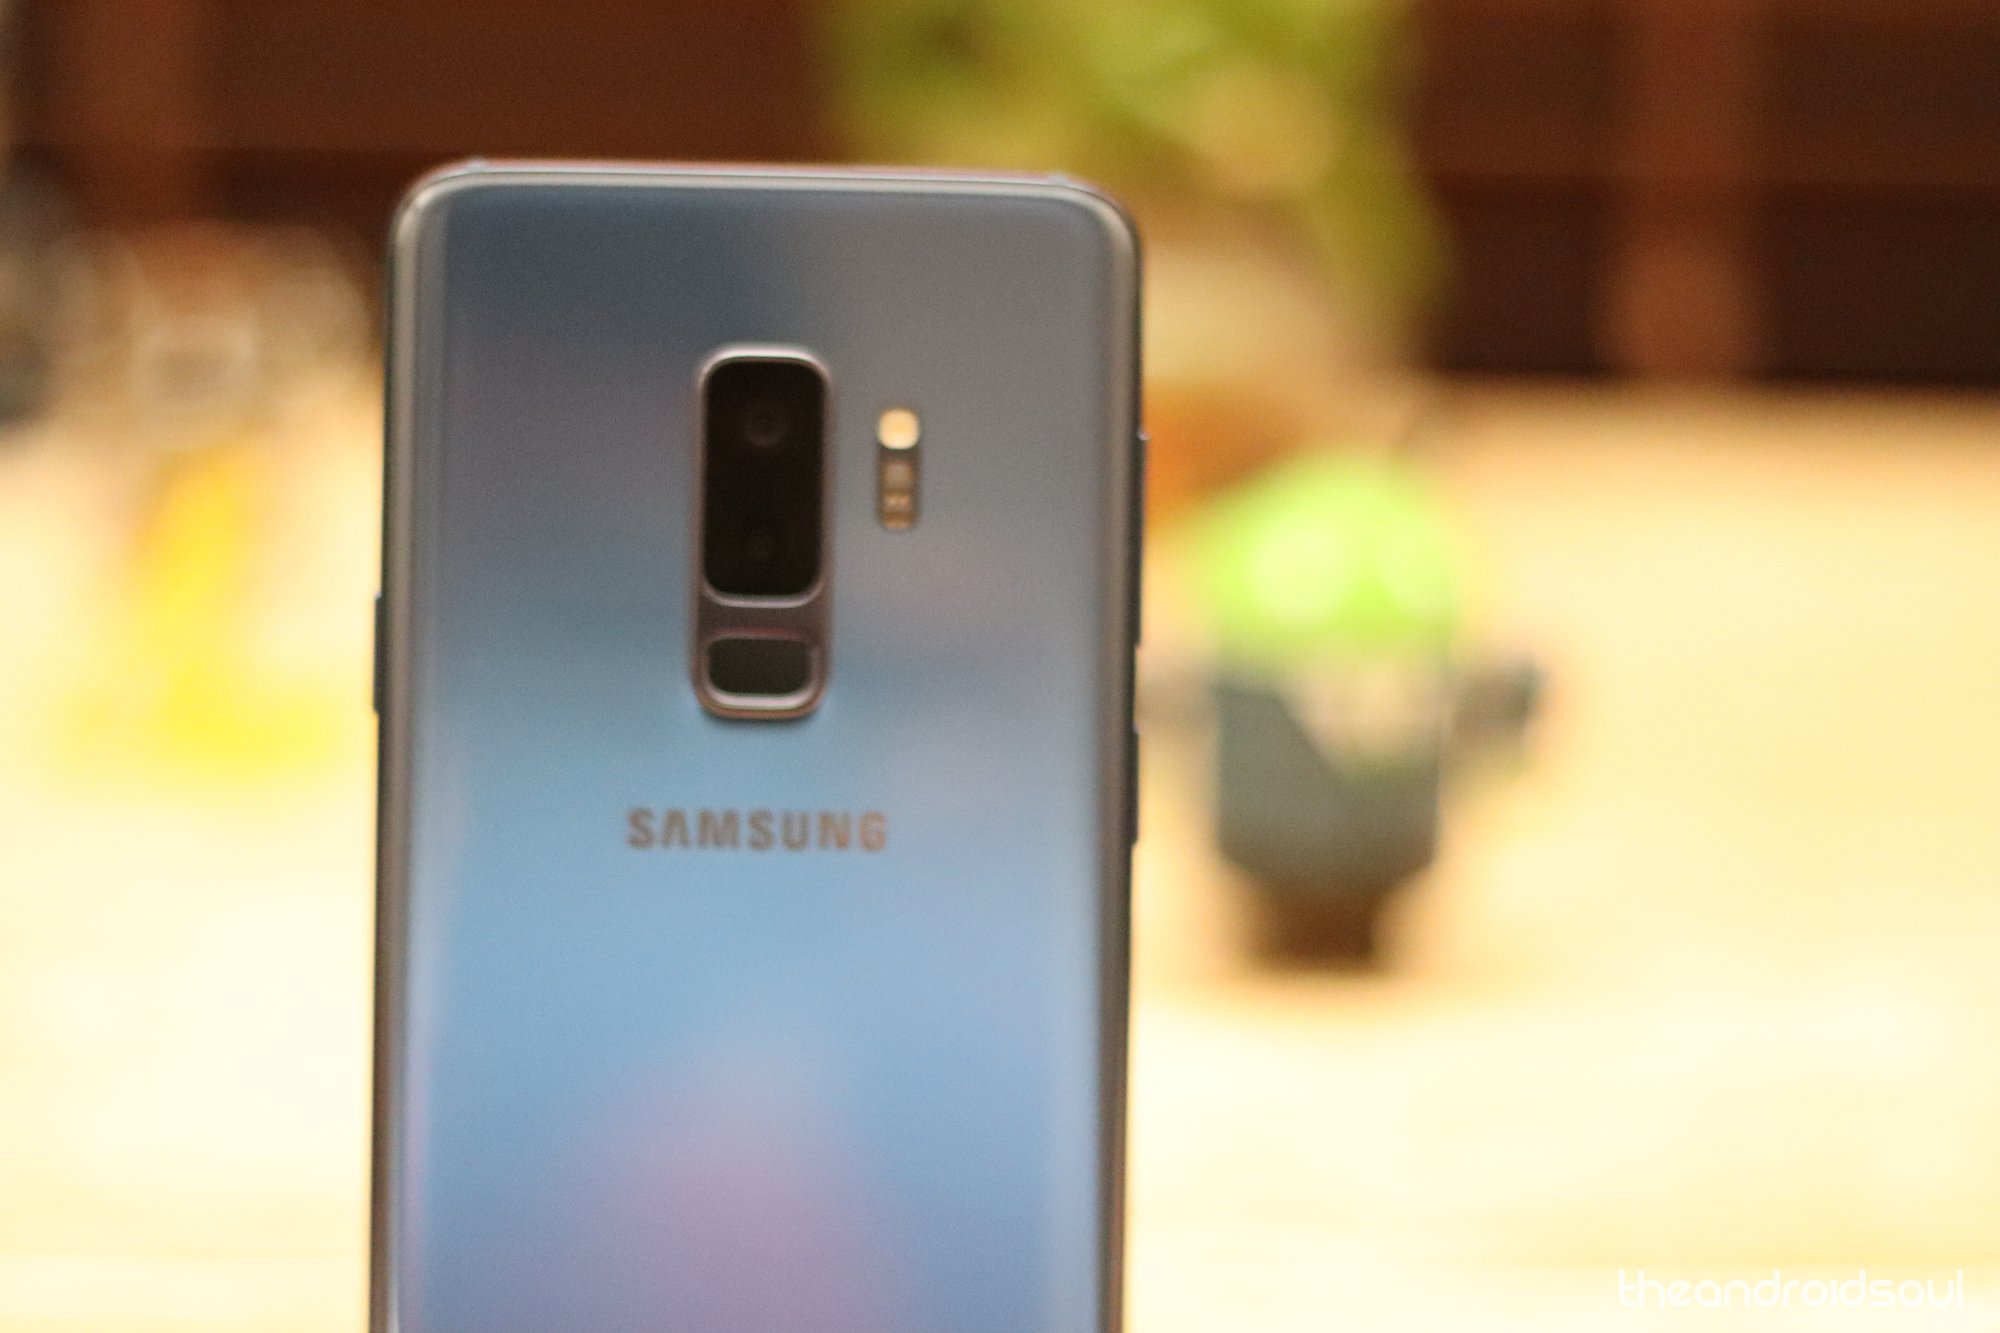 Samsung Galaxy S9 Plus Android Q update